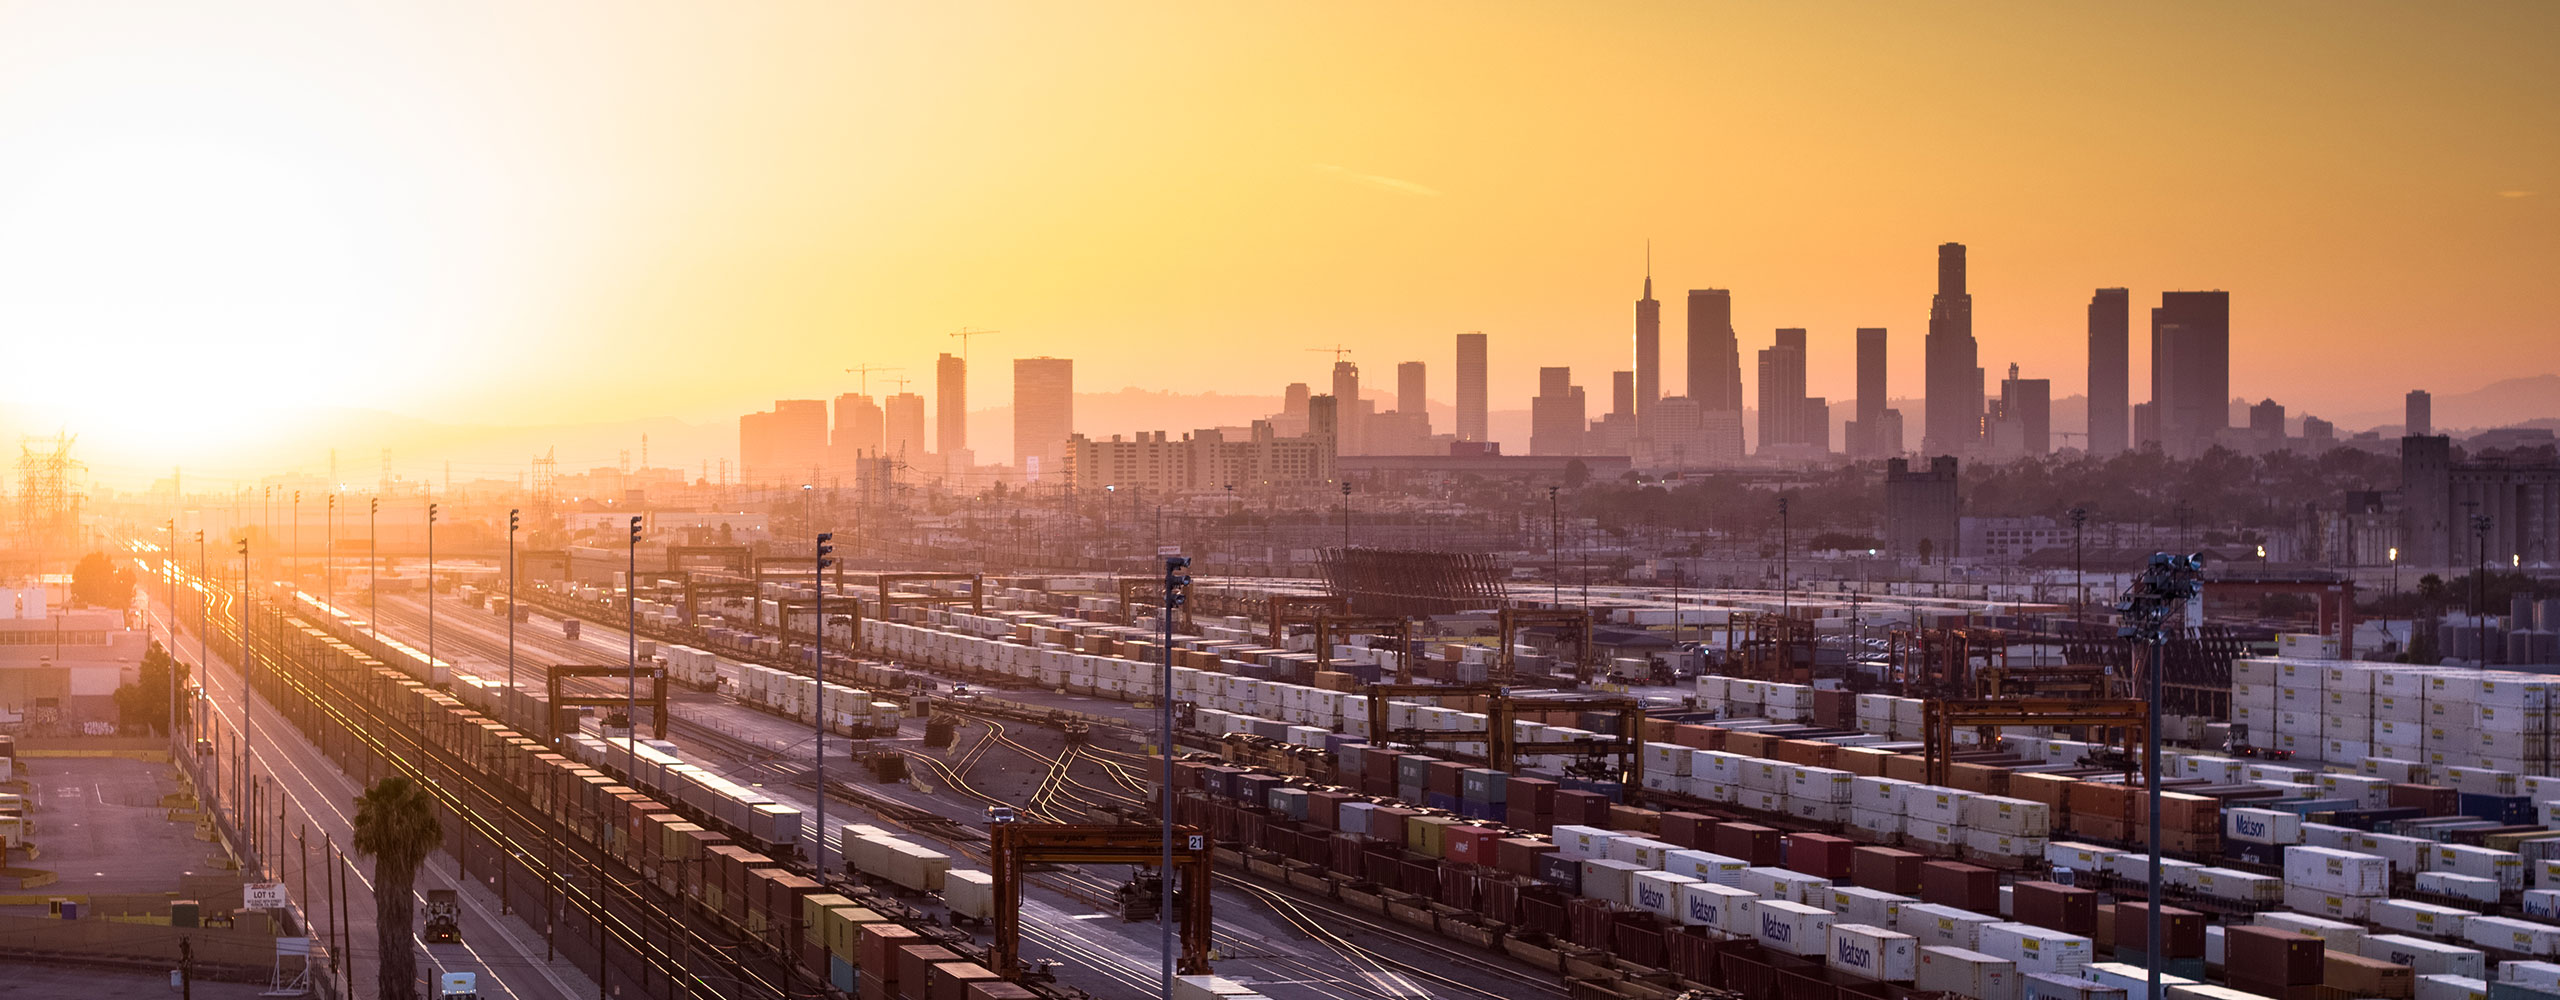 Intermodal railyard filled with containers beside train tracks in front of city landscape